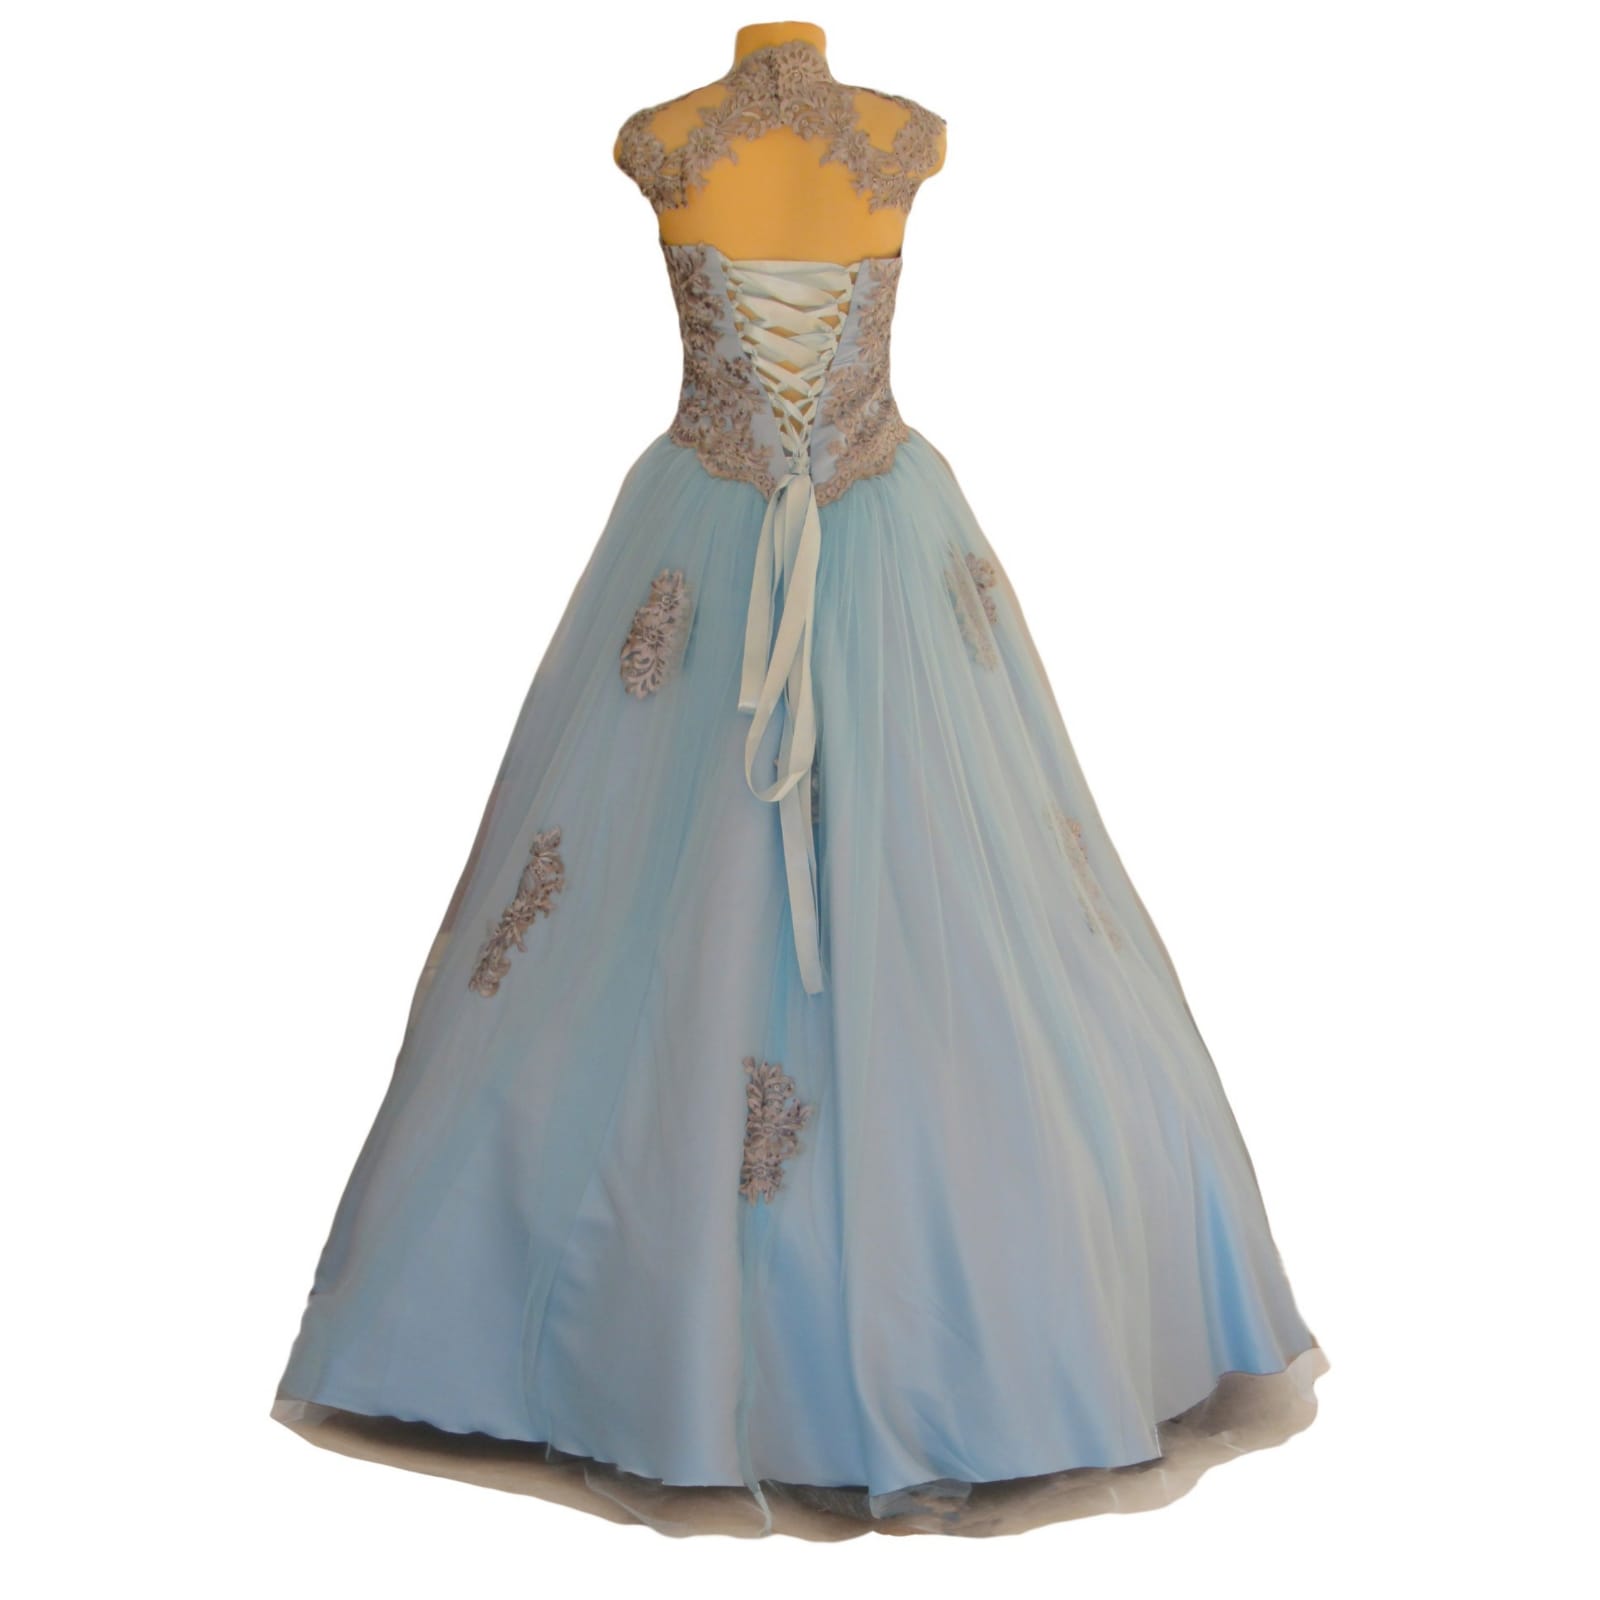 Powder blue and silver prom ball gown dress 9 powder blue and silver prom ball gown dress. With a lace-up back. Bodice detailed with silver lace and beads. Illusion neckline and shoulders. Bottom of the dress with tulle detailed with lace appliques.